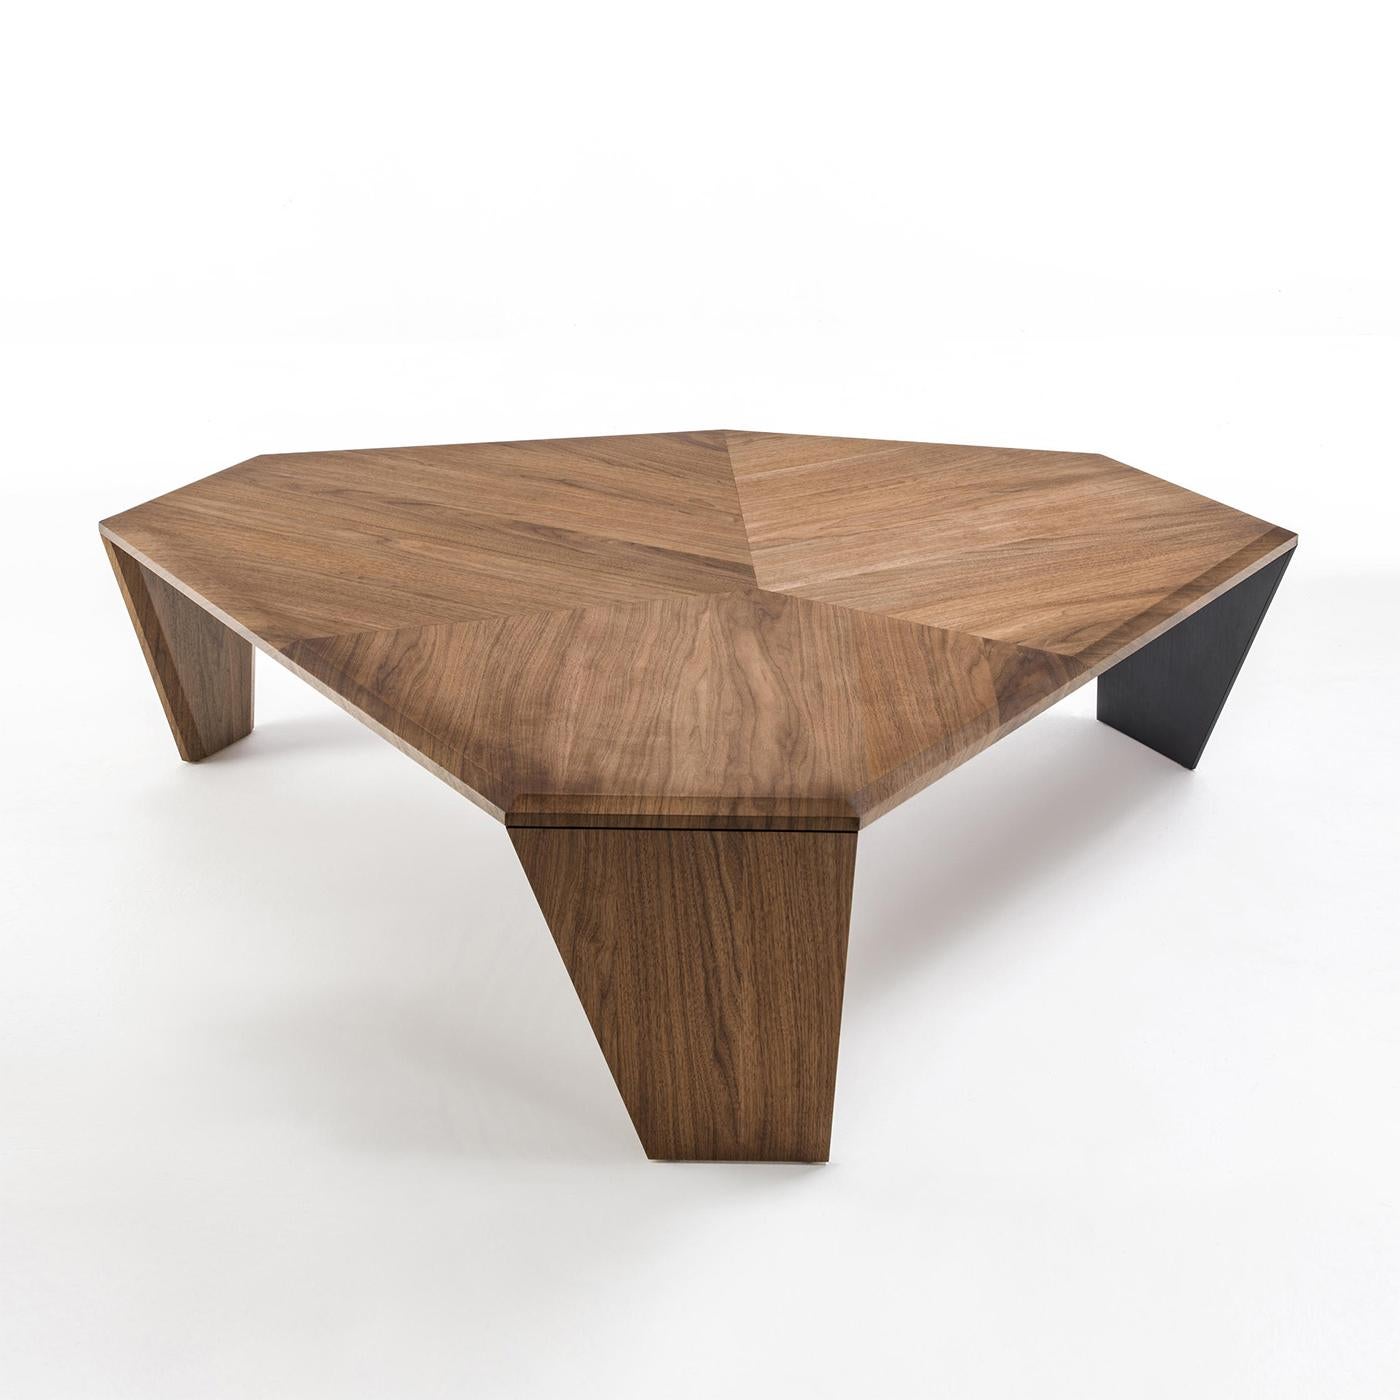 Coffee table triple walnut set of 2 tables all in
solid walnut wood with inlayed veneer and with
two legs in solid walnut and one in black matt metal.
Measures: 
A/ L 147 x D 134 x H 41cm, price: 8400,00€.
B/ L 108 x D 102 x H 35.5cm, price: